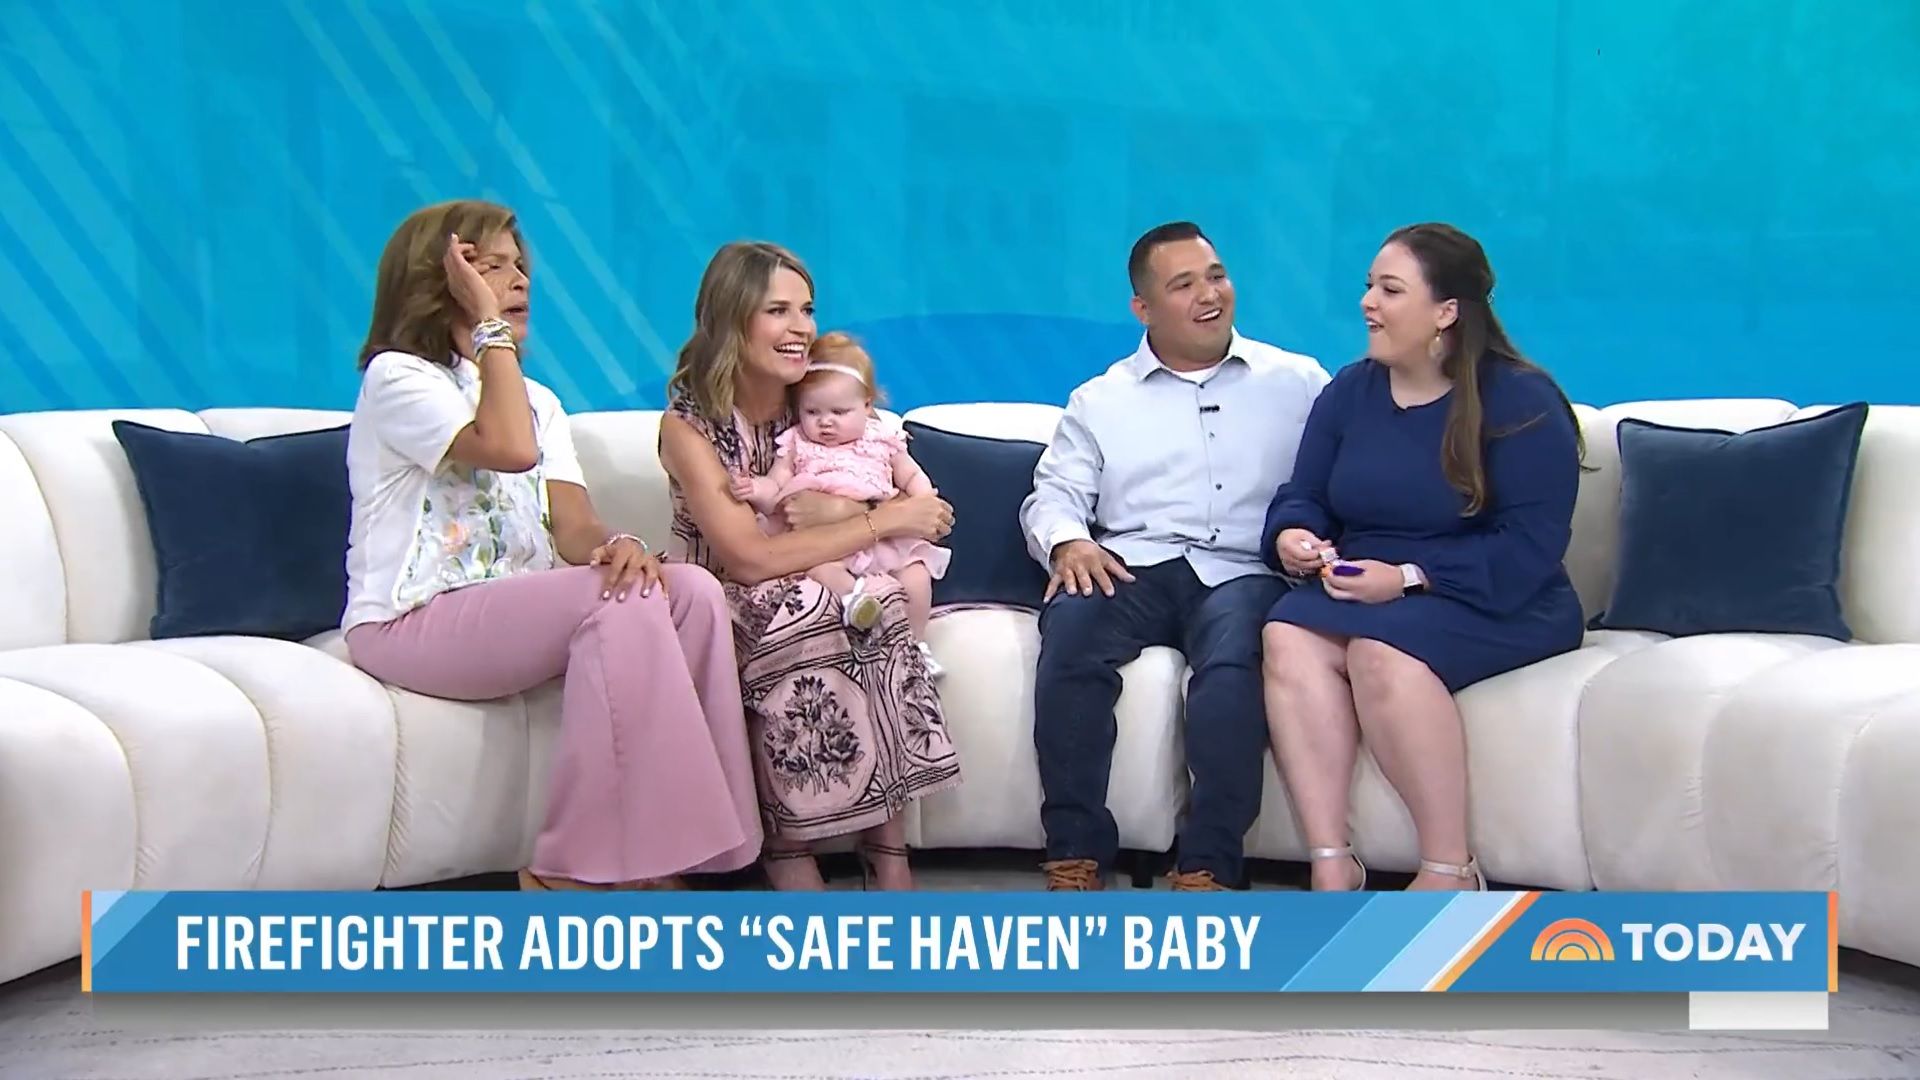 Savannah and Hoda sat on a couch alongside Zoey's parents, Savannah is holding Zoey and Hoda is wiping away a tear from her eye